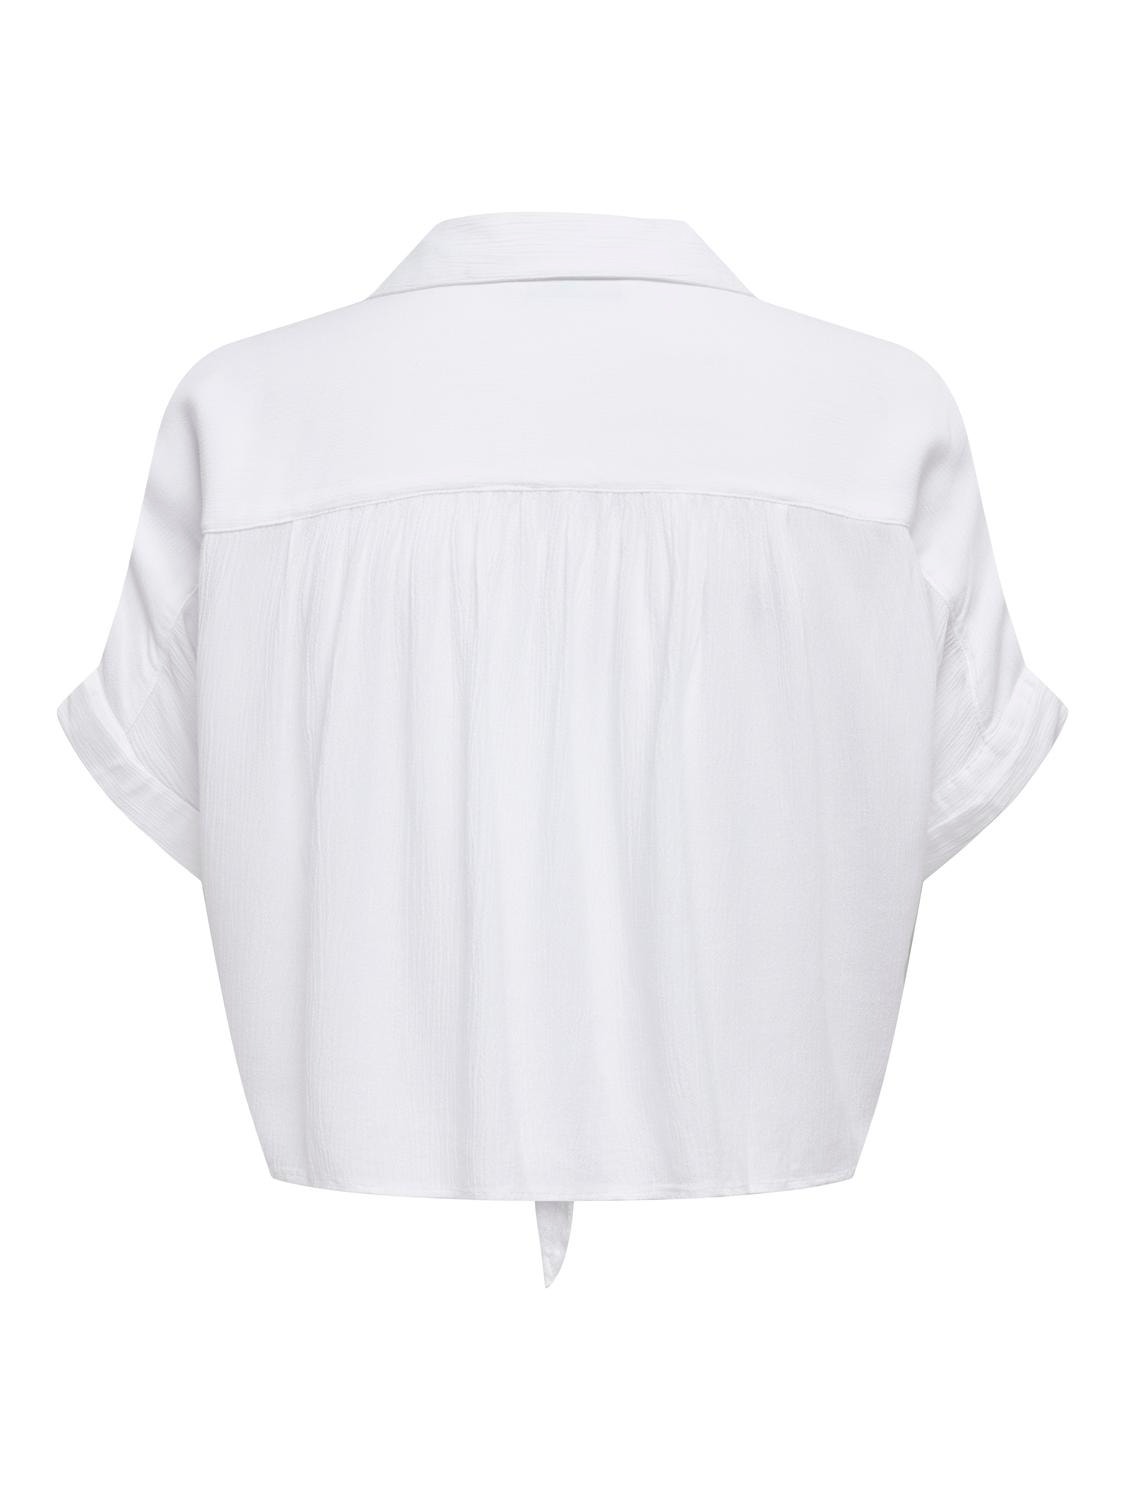 ONLY Short Sleeved Shirt With Knot Detail -White - 15281497